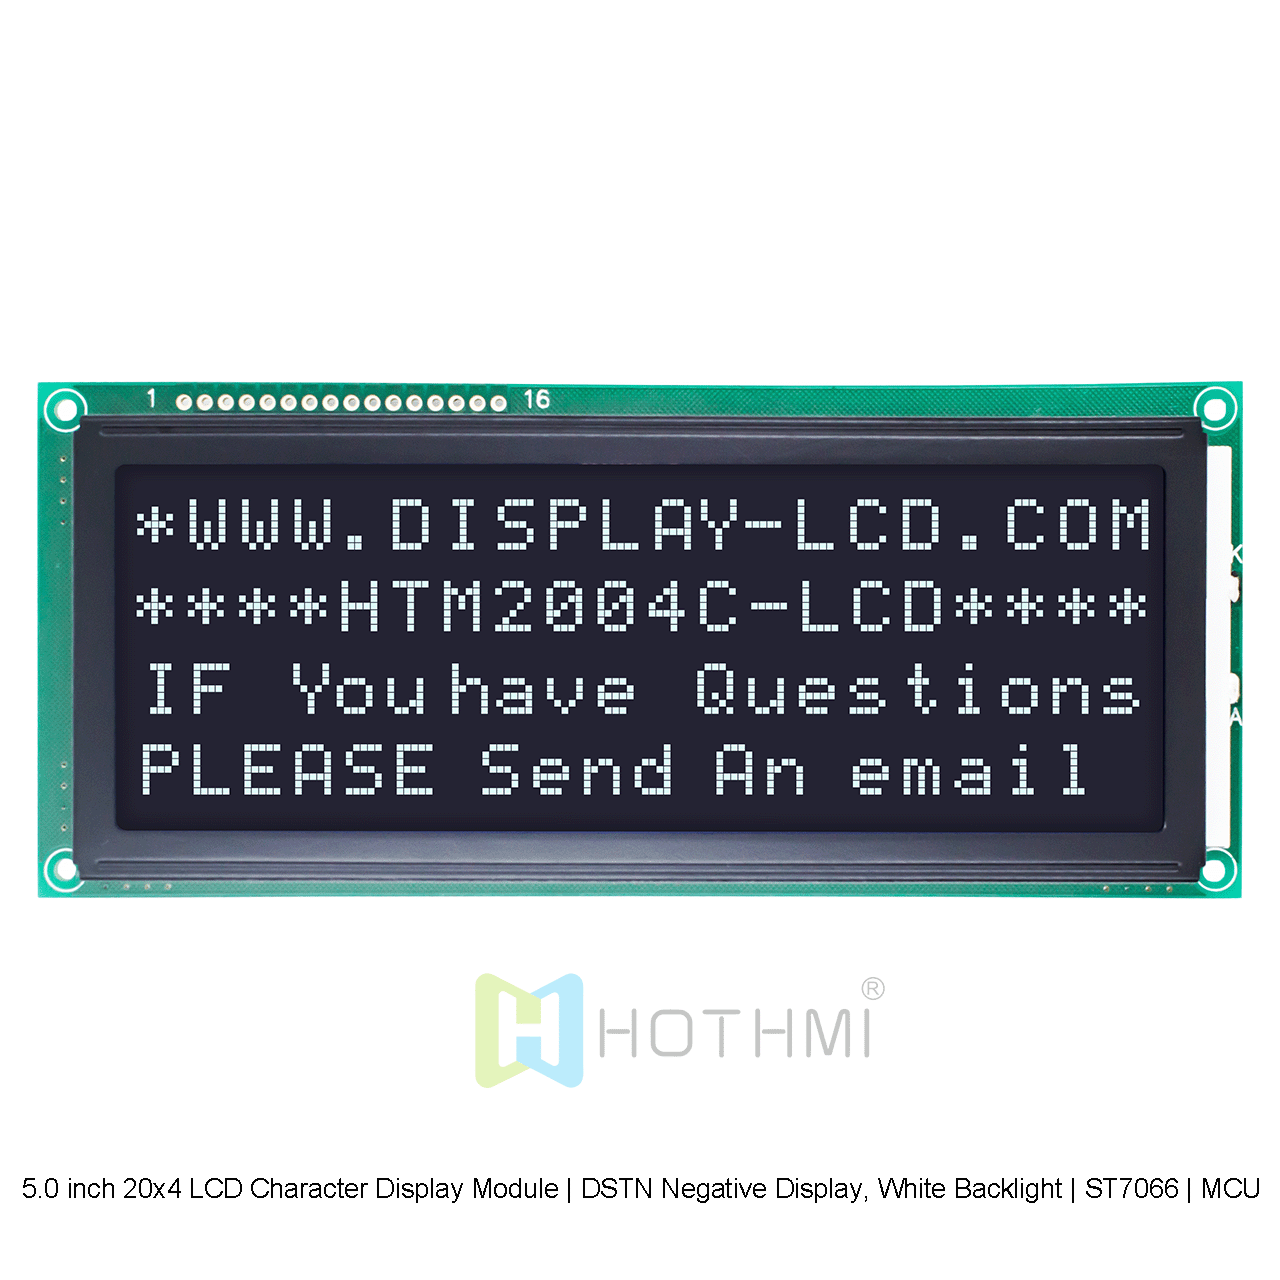 5.0 inch 20x4 LCD Character Display Module | DSTN Negative Display, White Backlight | ST7066 | MCU Interface | Black Background with White Characters Arduino